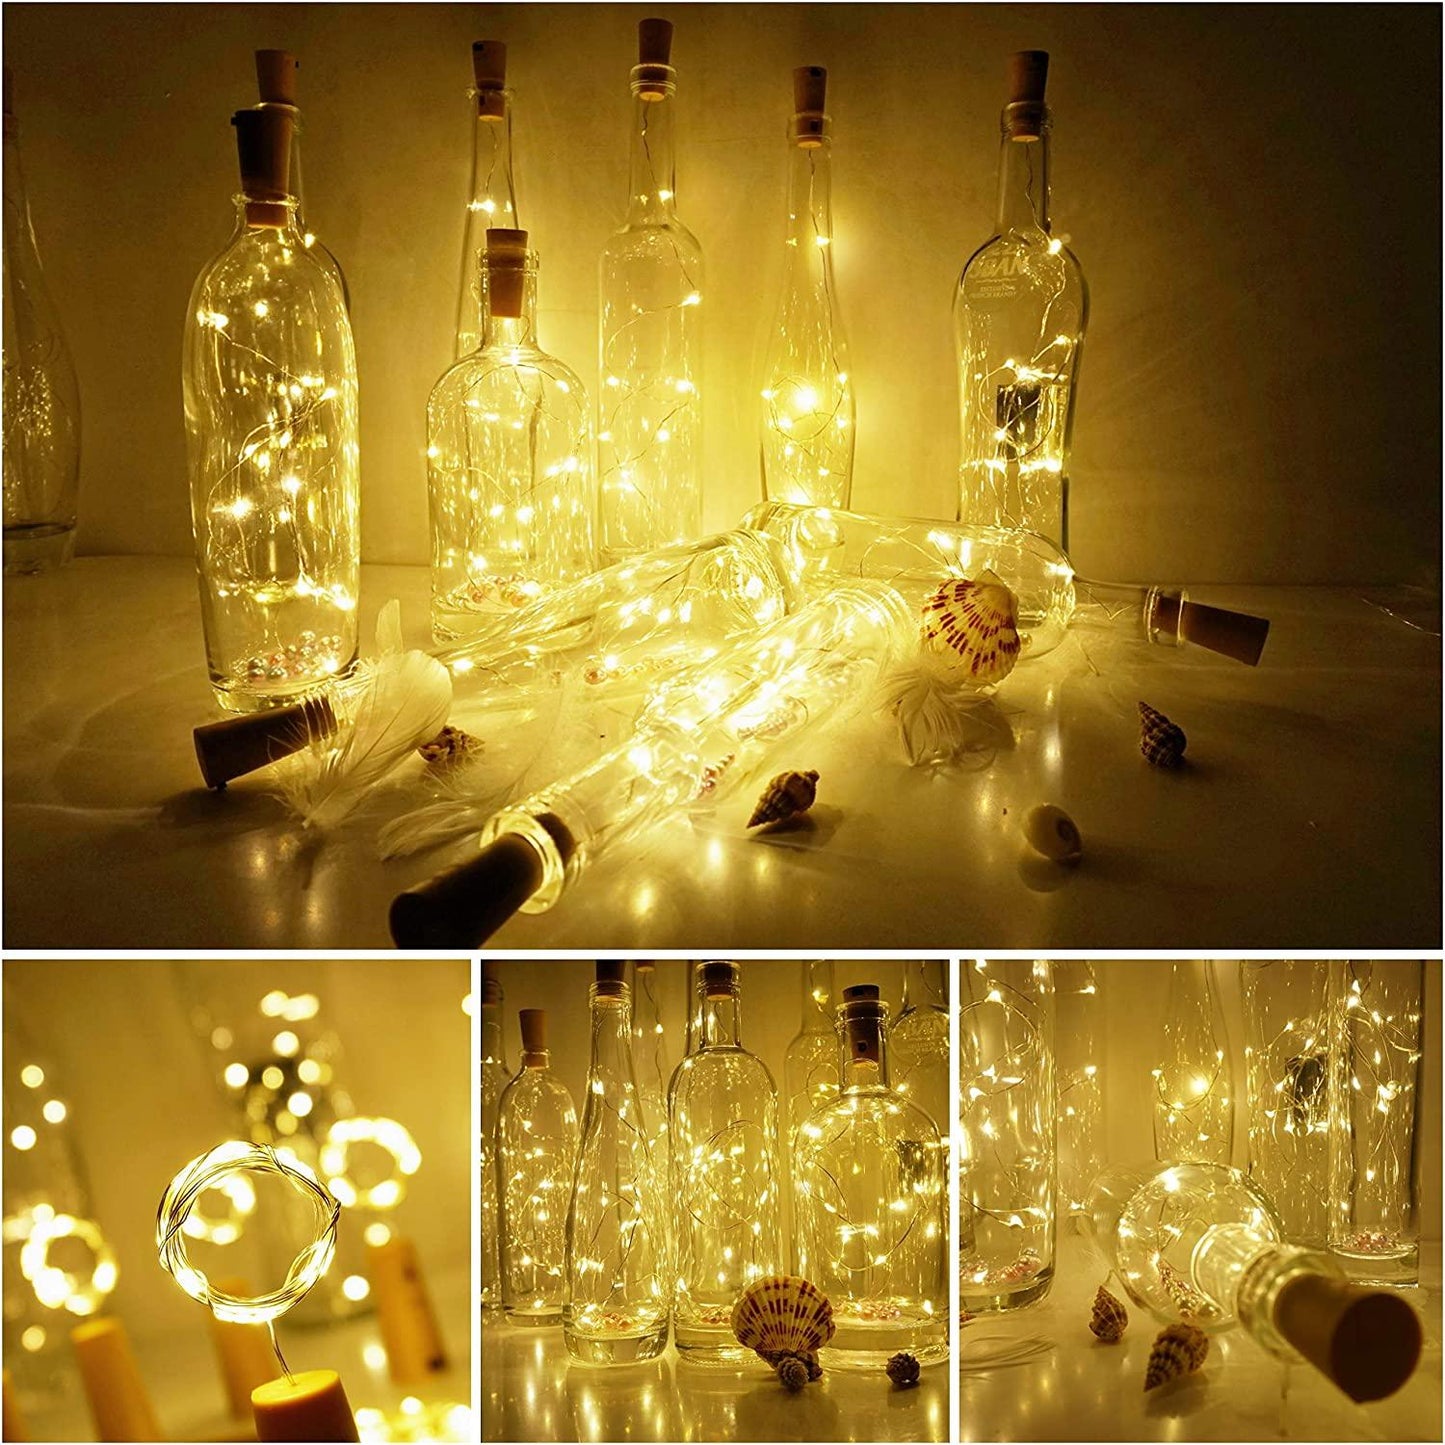 DIY String Light Ornaments for Tables,Parties, bar Decorations, Wedding,Christmas,Celebrations - If you say i do